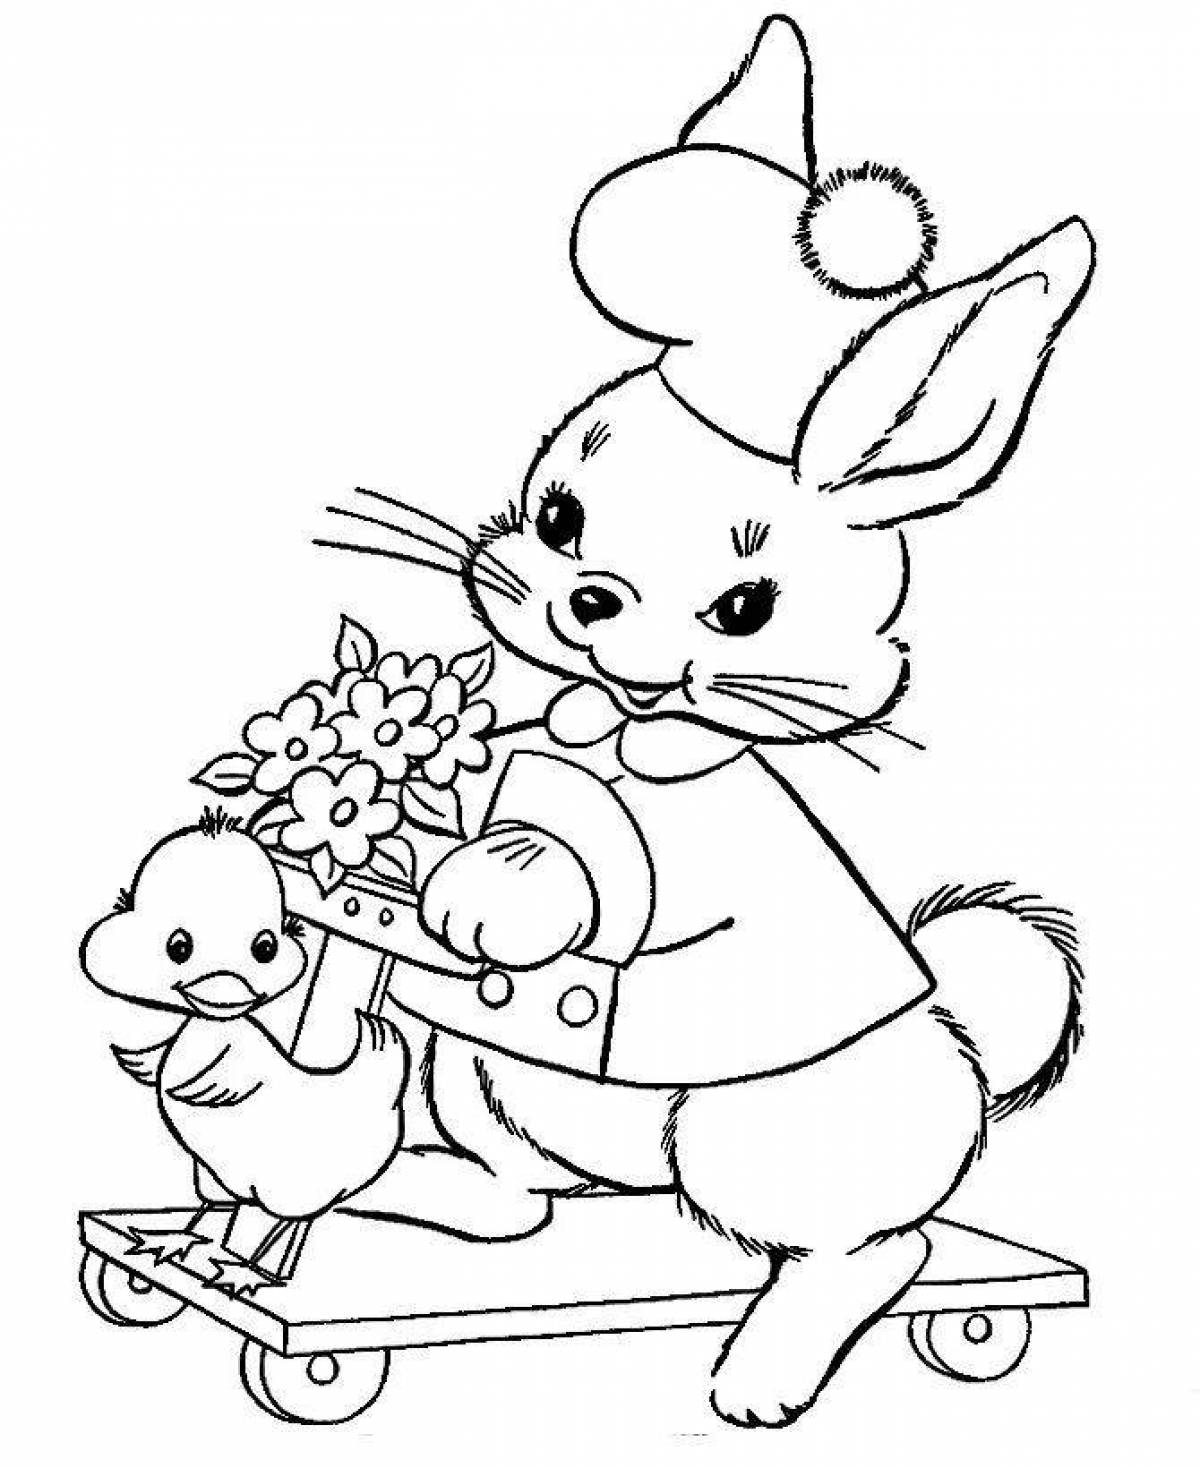 Fantastic coloring book year of the rabbit 2023